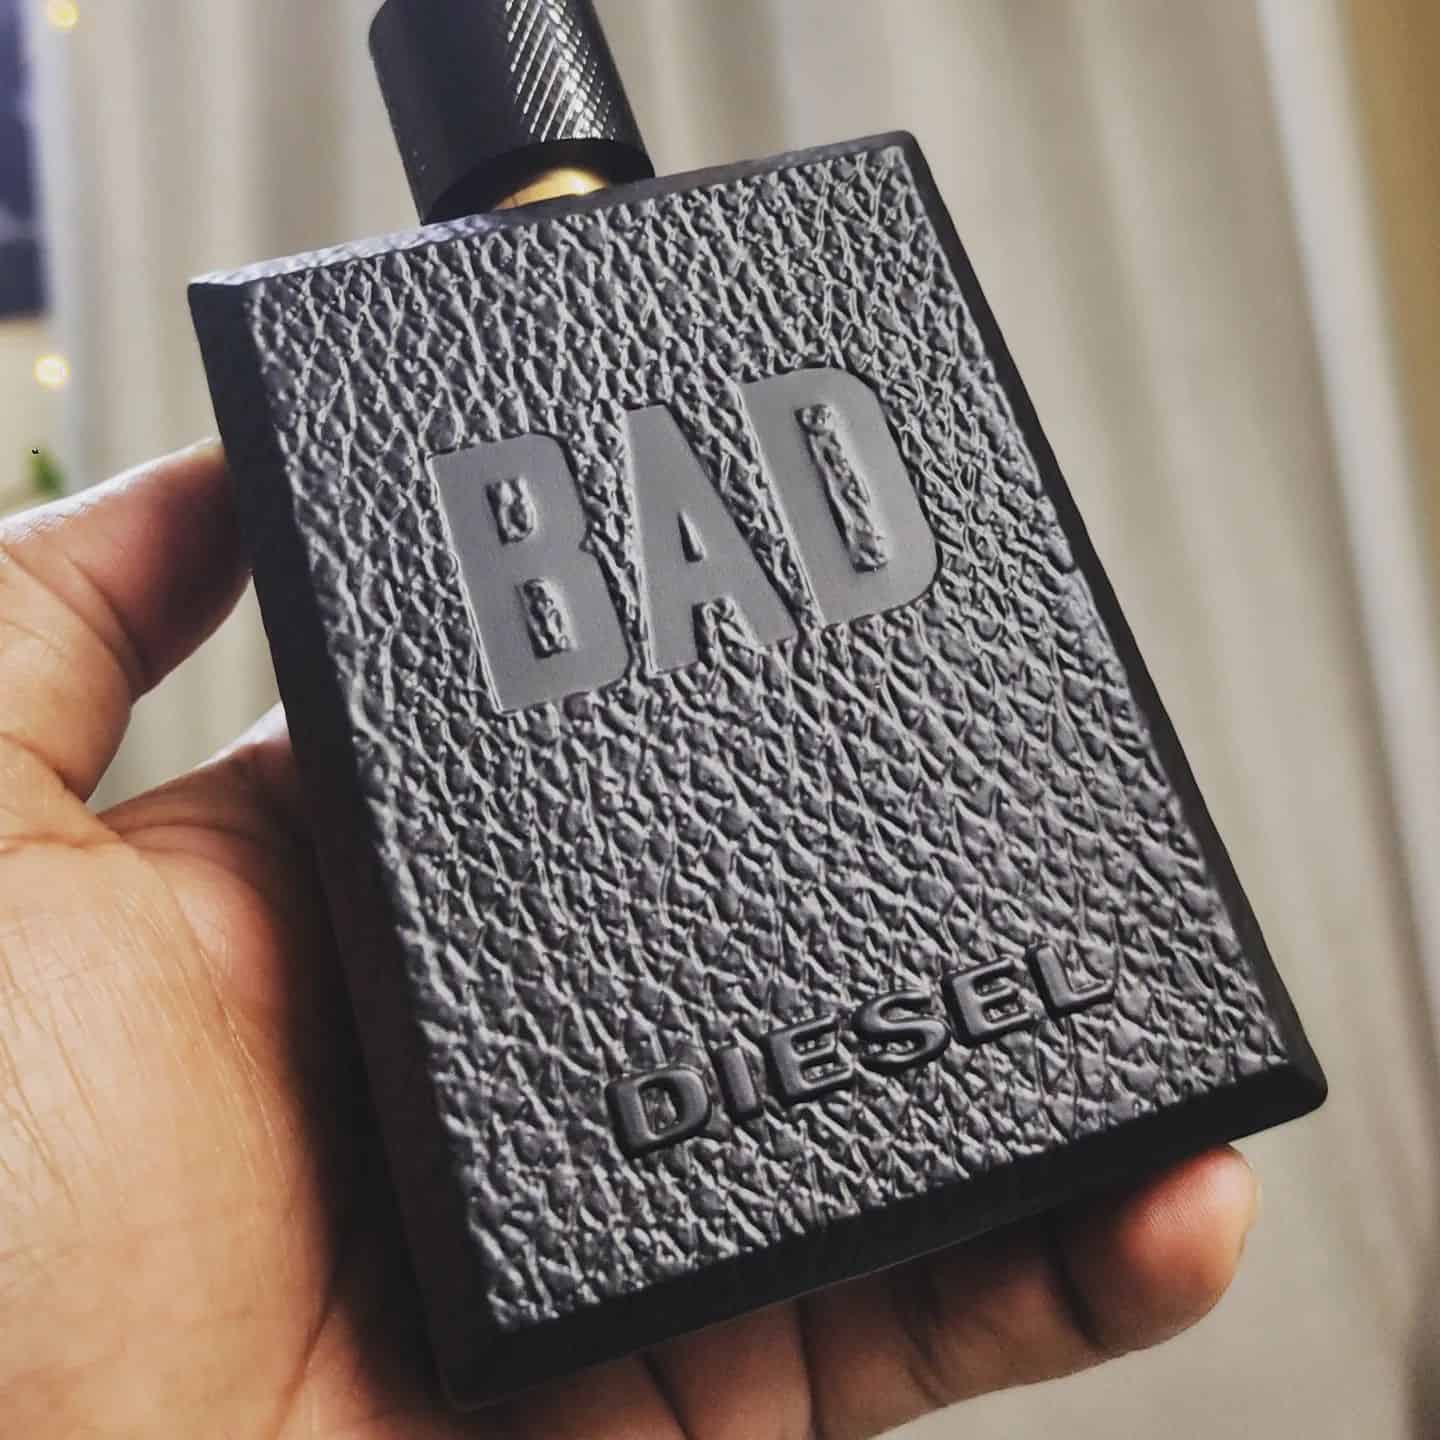 holding a bottle of the bad cologne by diesel